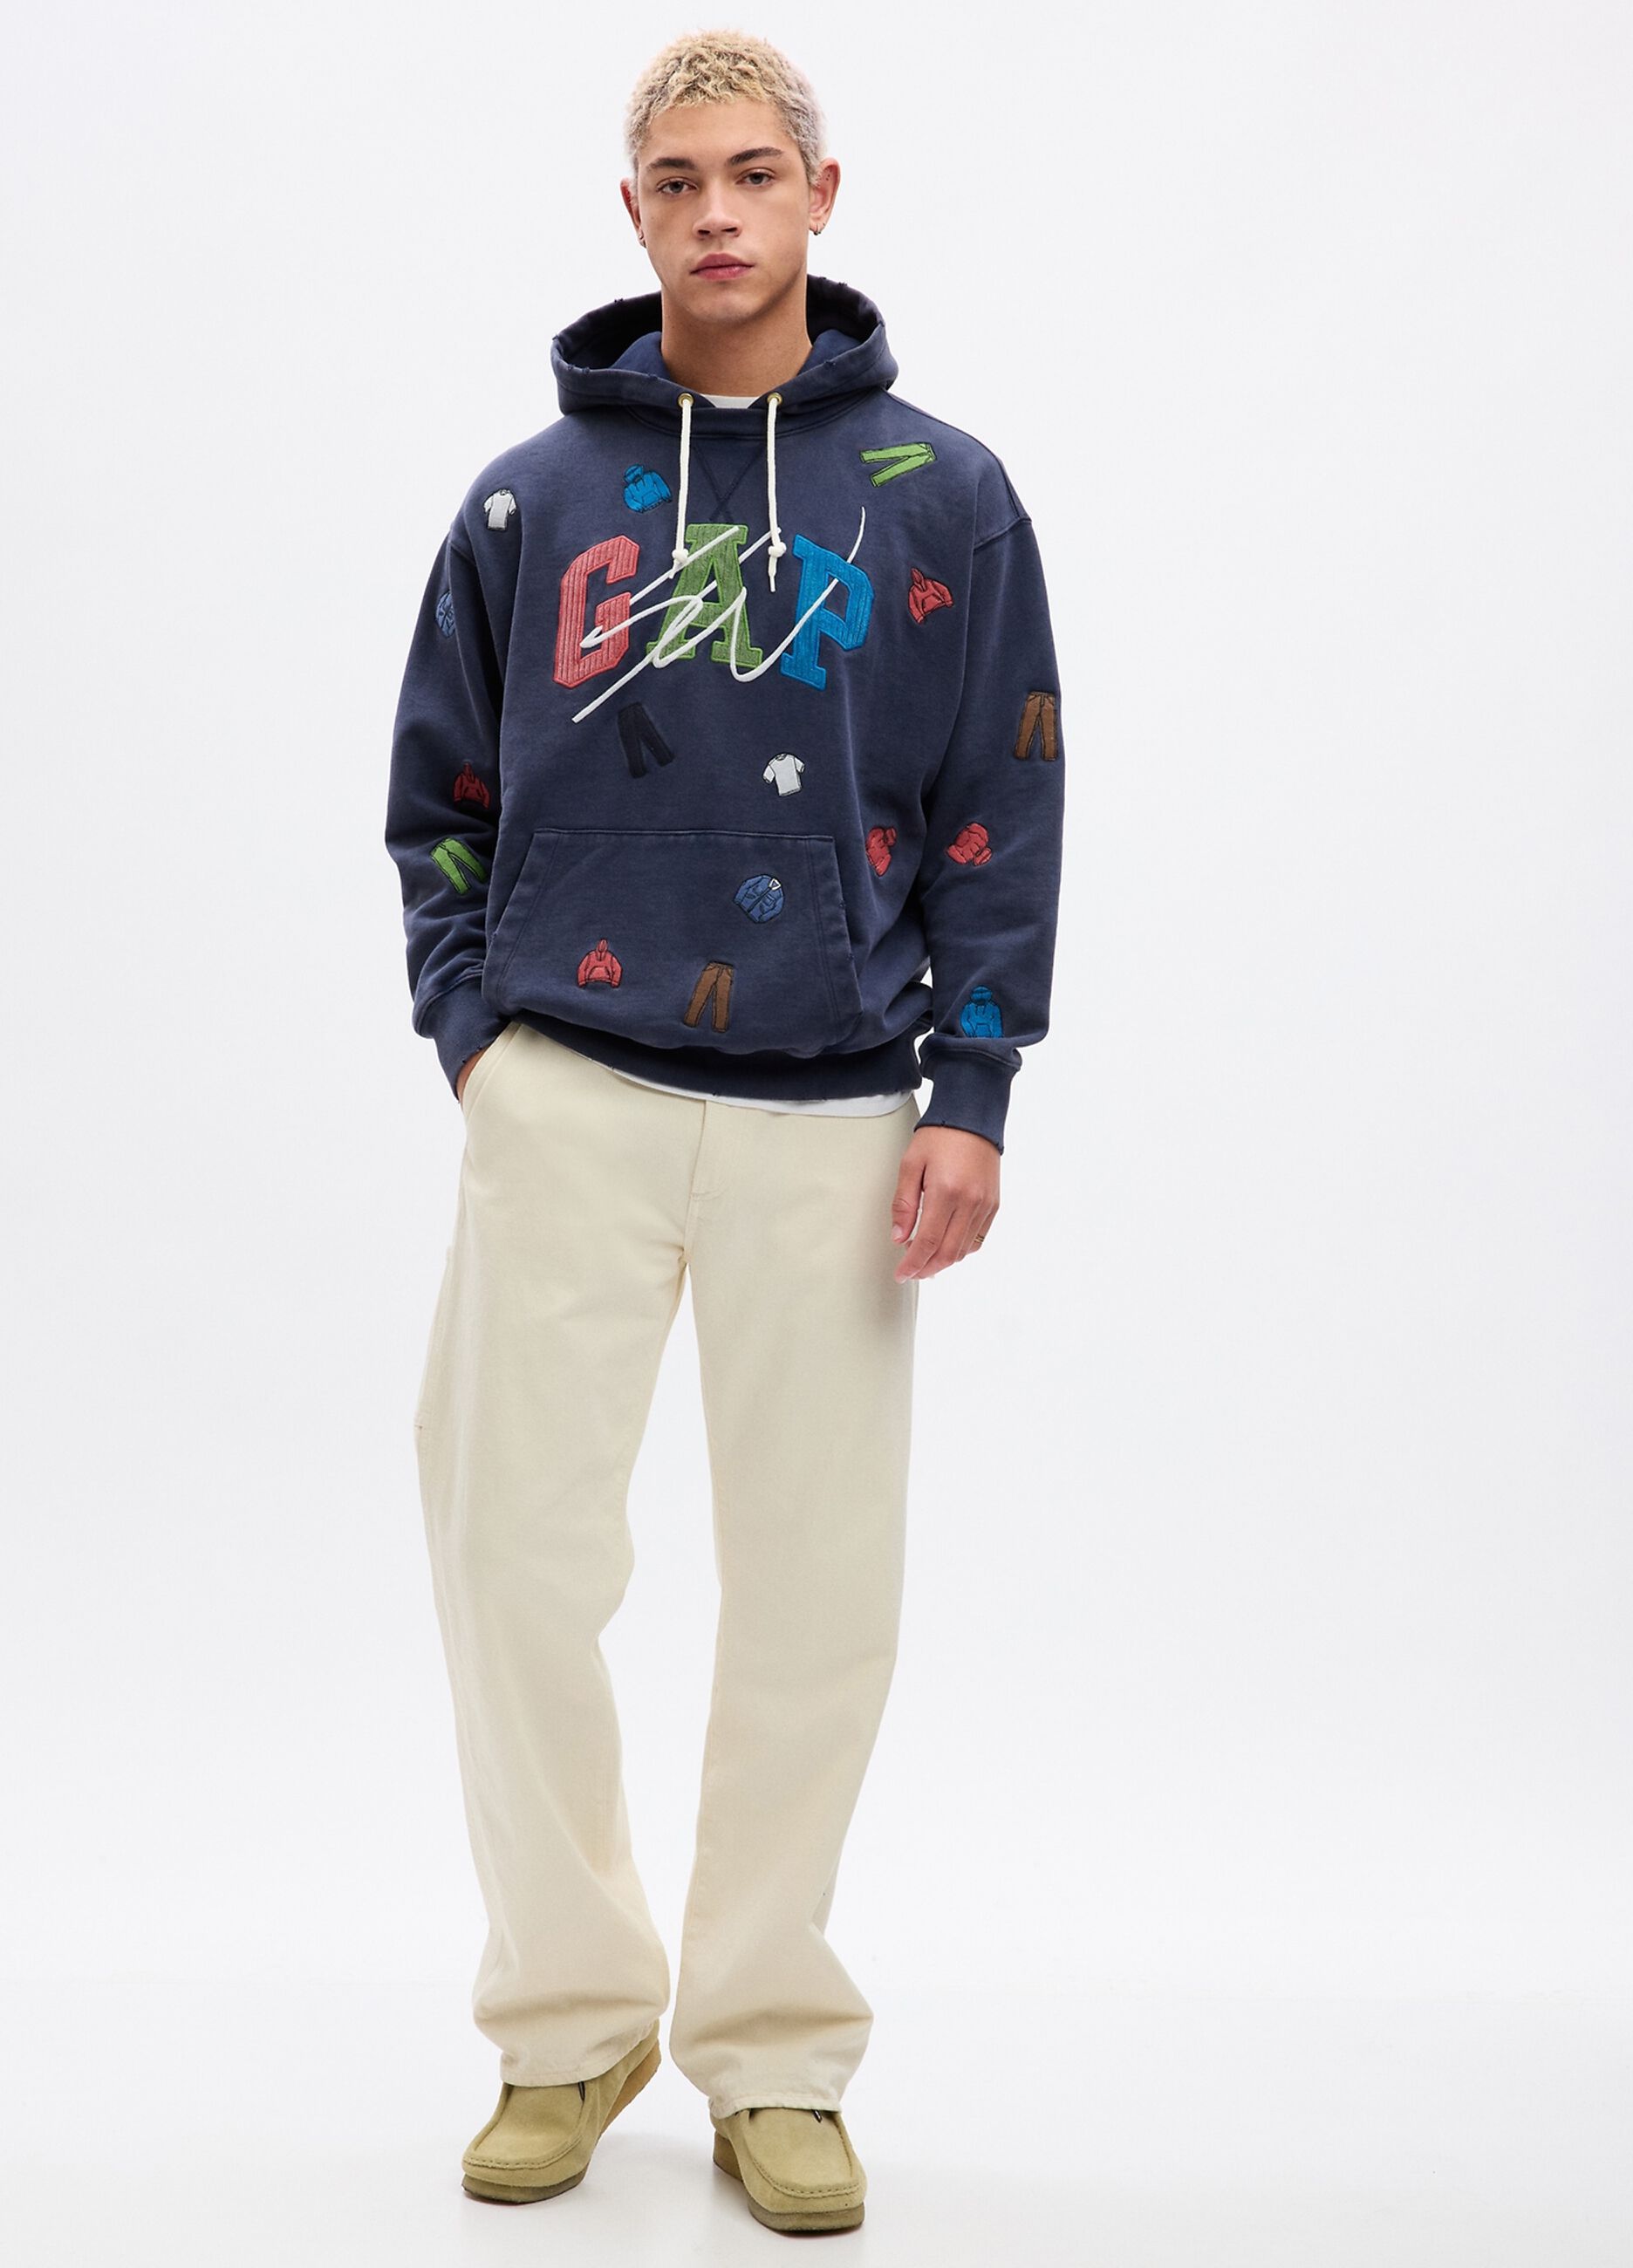 Sweatshirt with hood and all-over Sean Wotherspoon embroidery